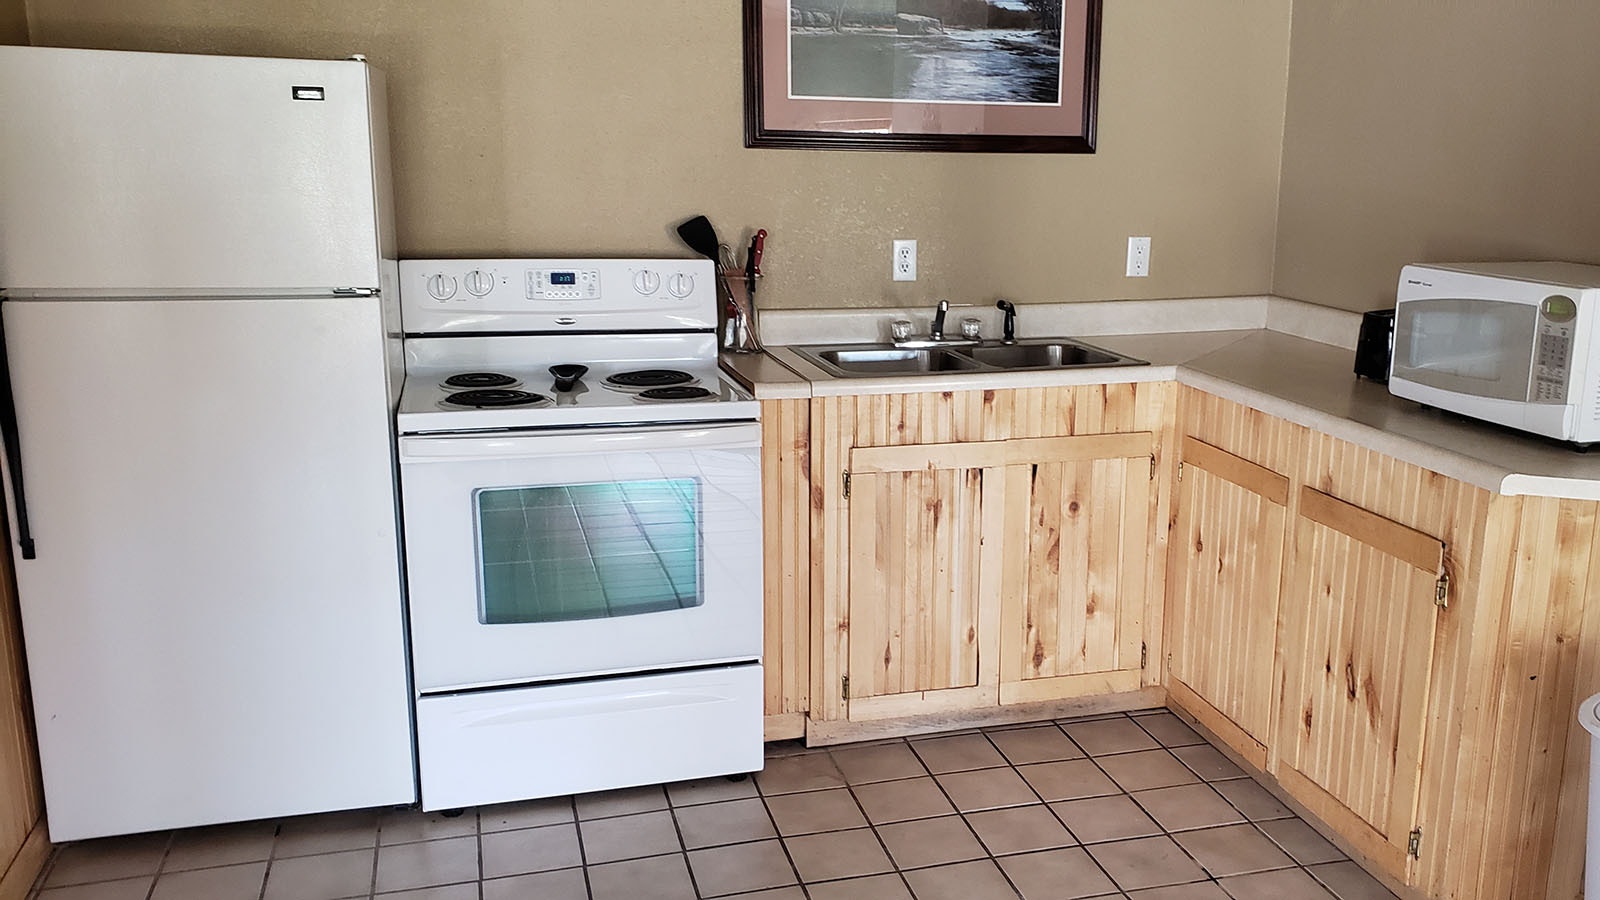 The event space includes a small kitchen to prepare food. The kitchen is also available to extended-stay guests.